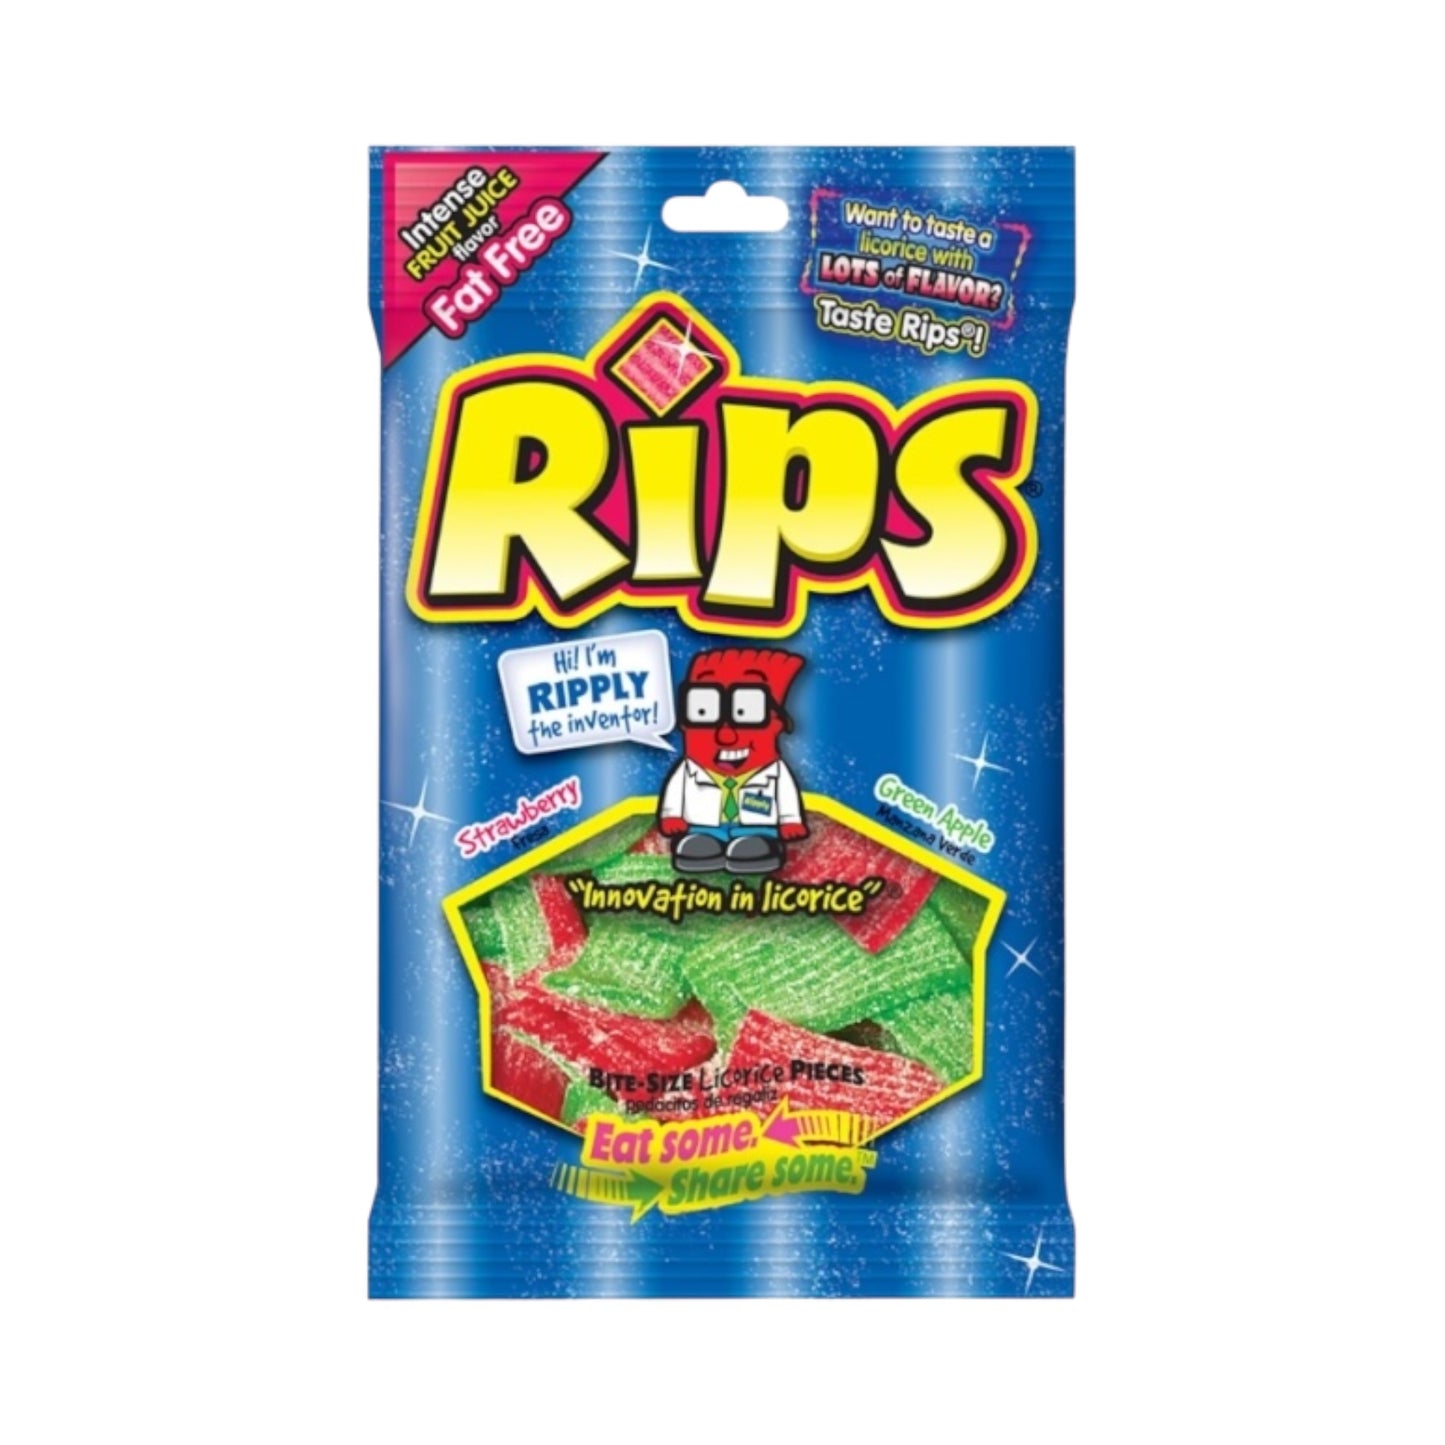 Rips Mix Sour Strawberry & Green Apple Candy - 5.5oz (155g)